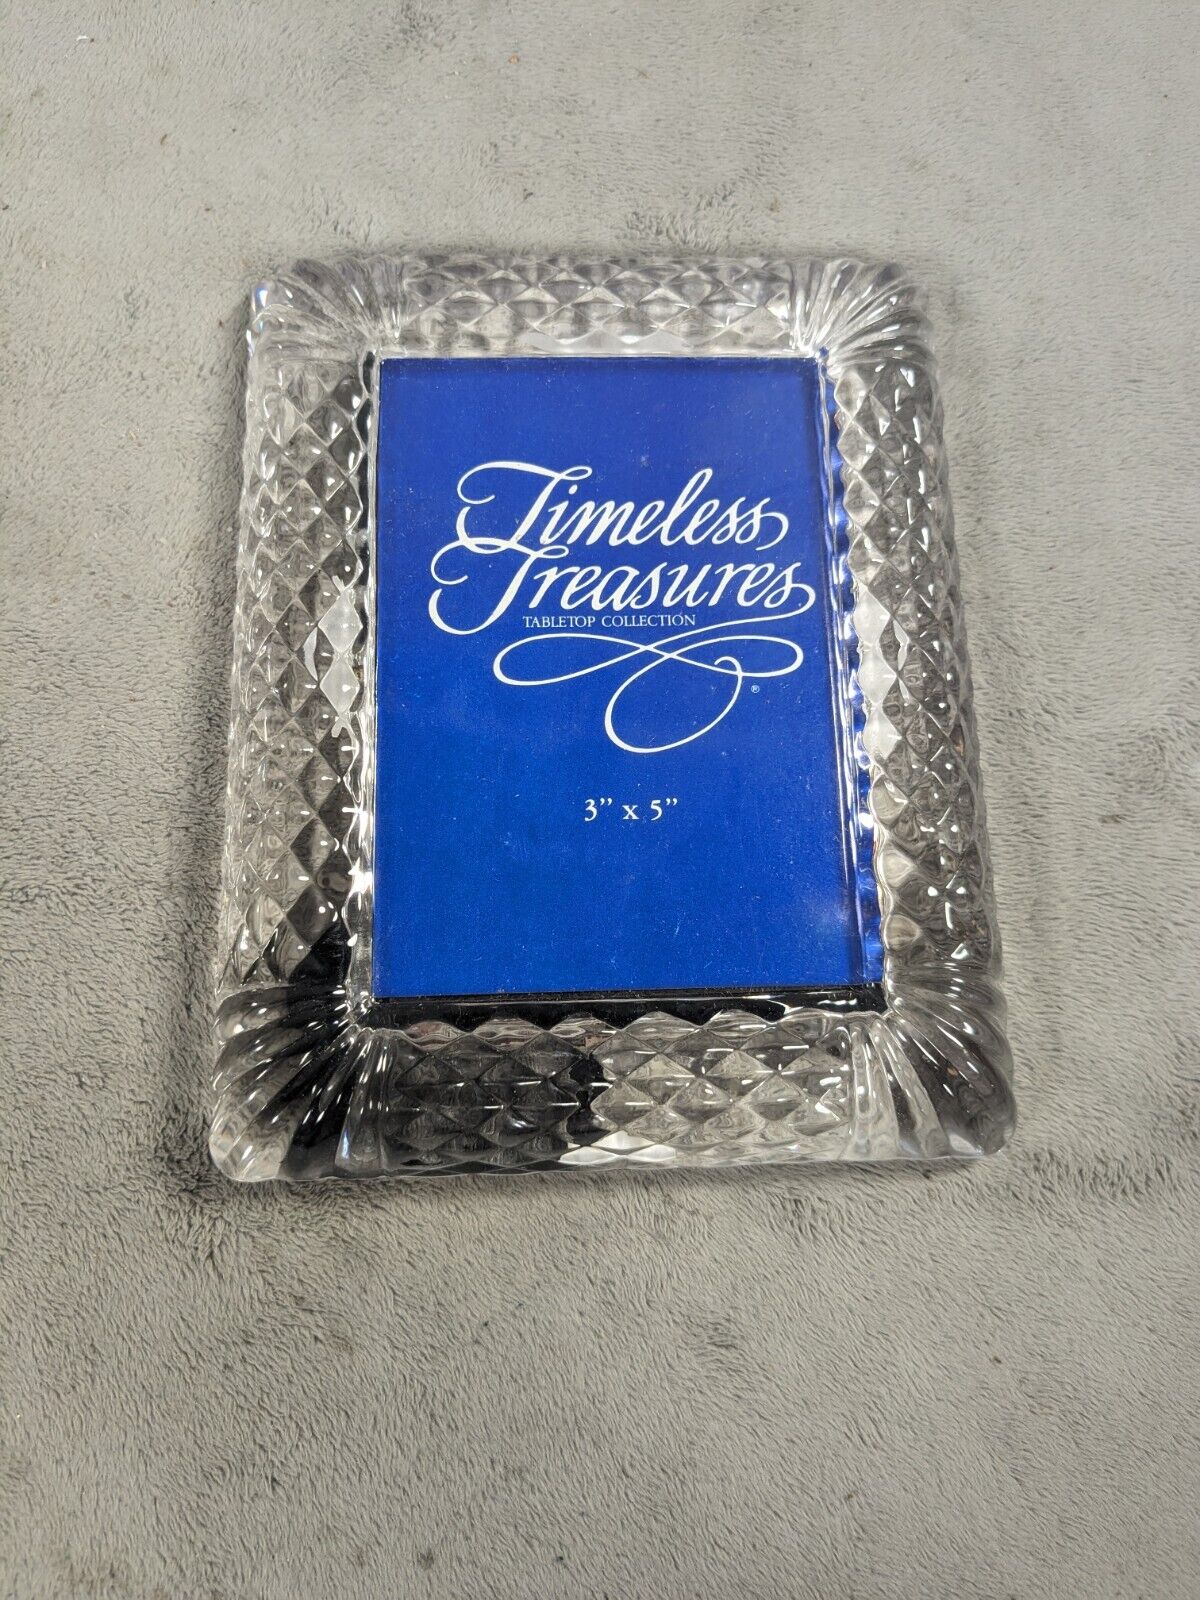 Timeless Treasures Heavy Crystal Picture Frame A Treasured Gift 